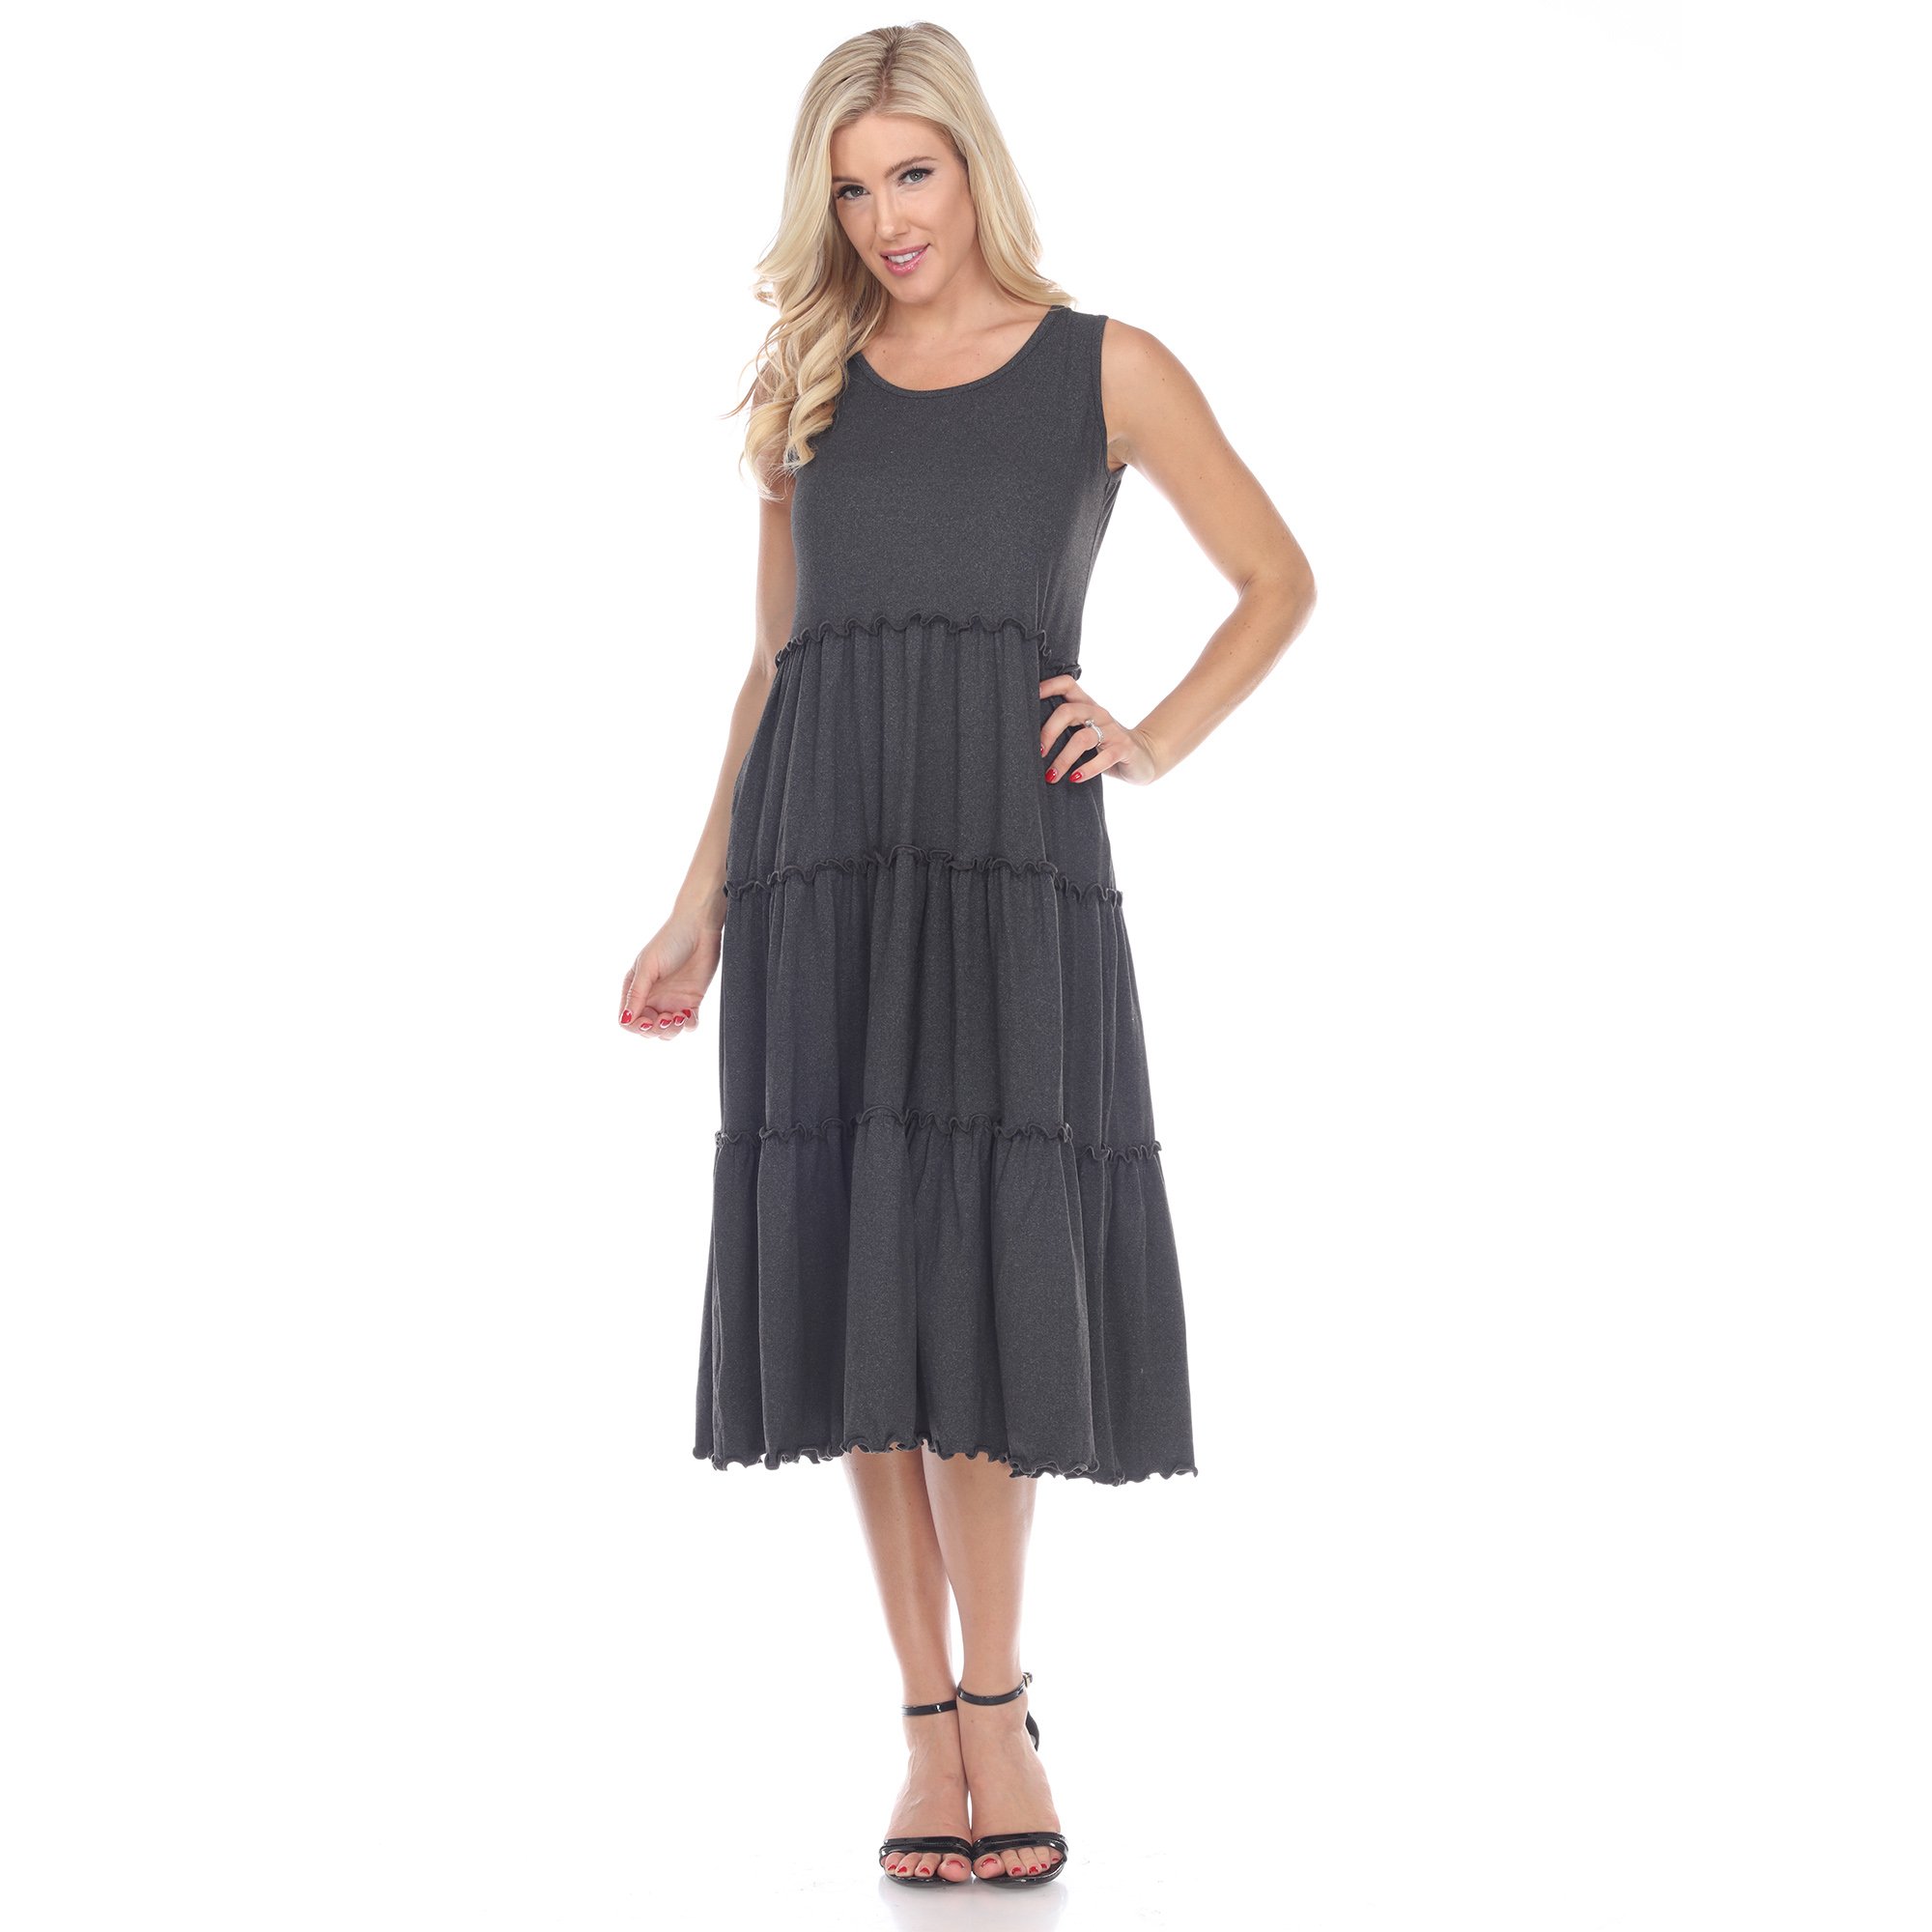 White Mark Women's Scoop Neck Tiered Midi Dress - Charcoal, Large